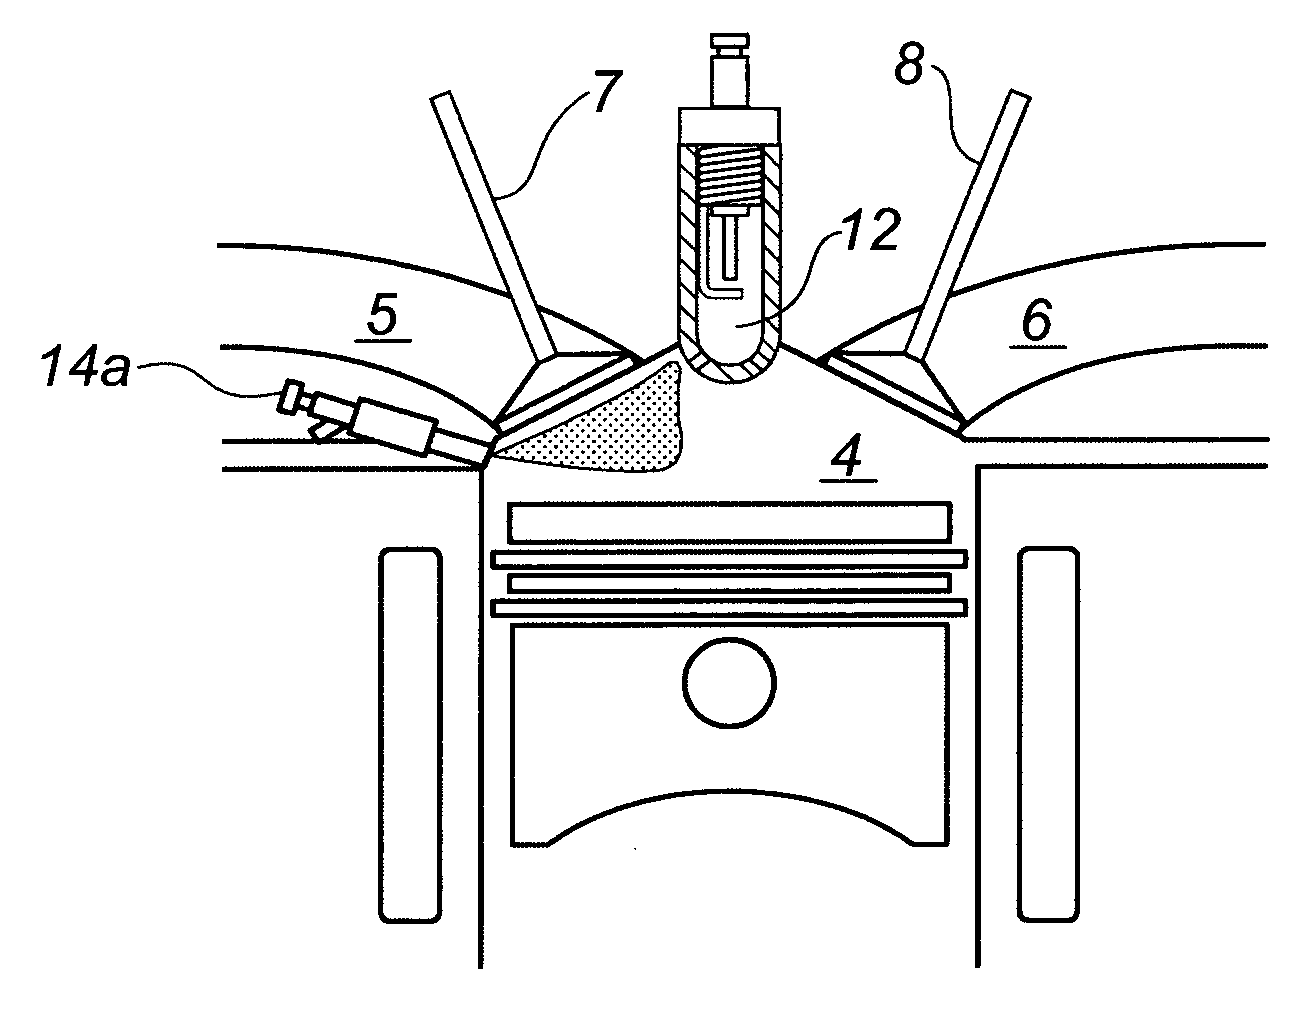 Internal combustion engine with a precombustion chamber